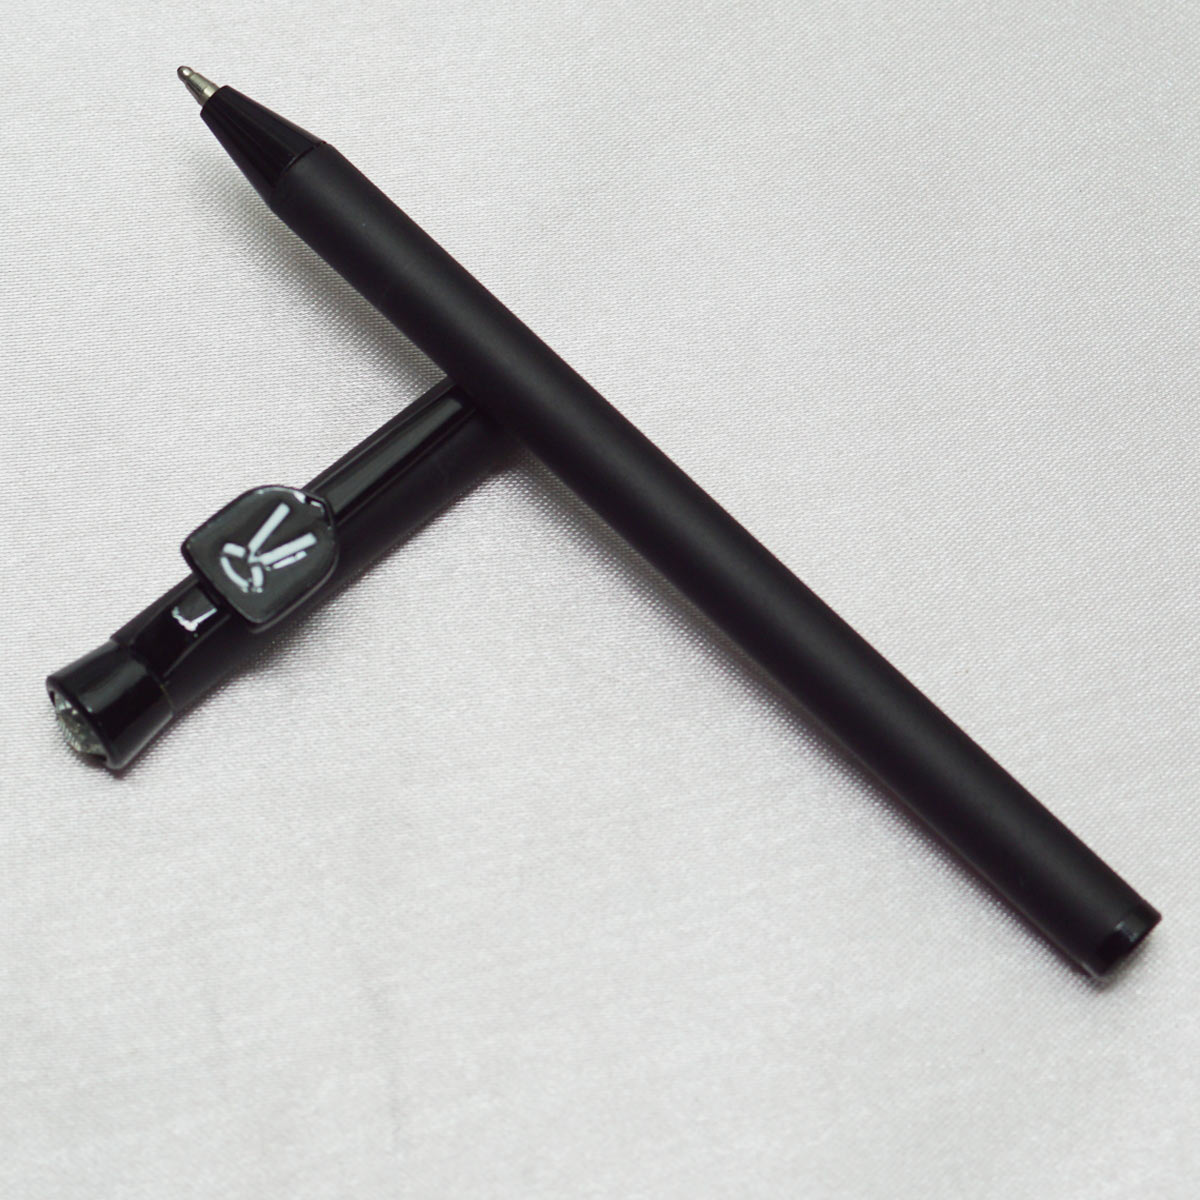 penhouse.in Full Black Color Body With Cap Top On Stone Fine Tip Advocate Symbol on Clip Cap Type Ball Pen SKU 22559